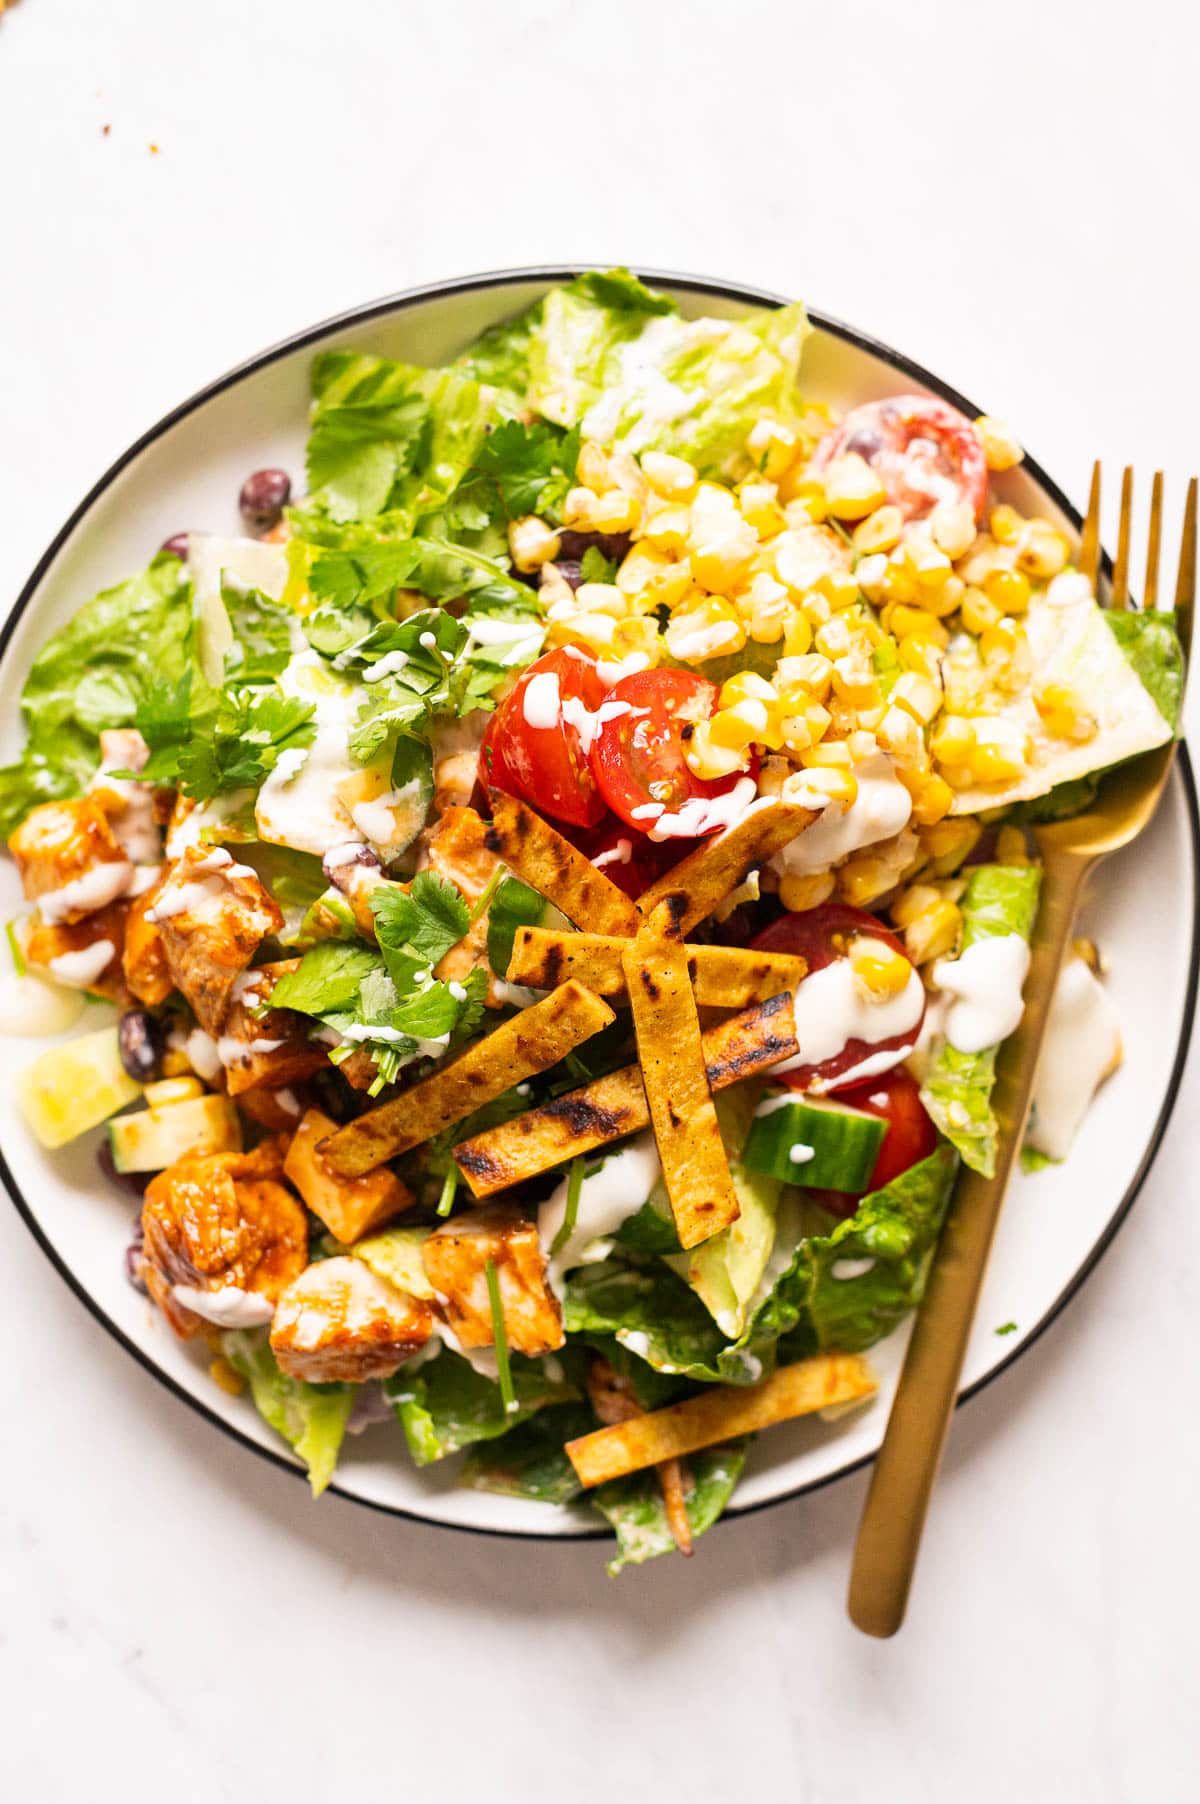 Barbecue chicken salad with corn, tomatoes, barbecue chicken and tortilla strips served on a plate.